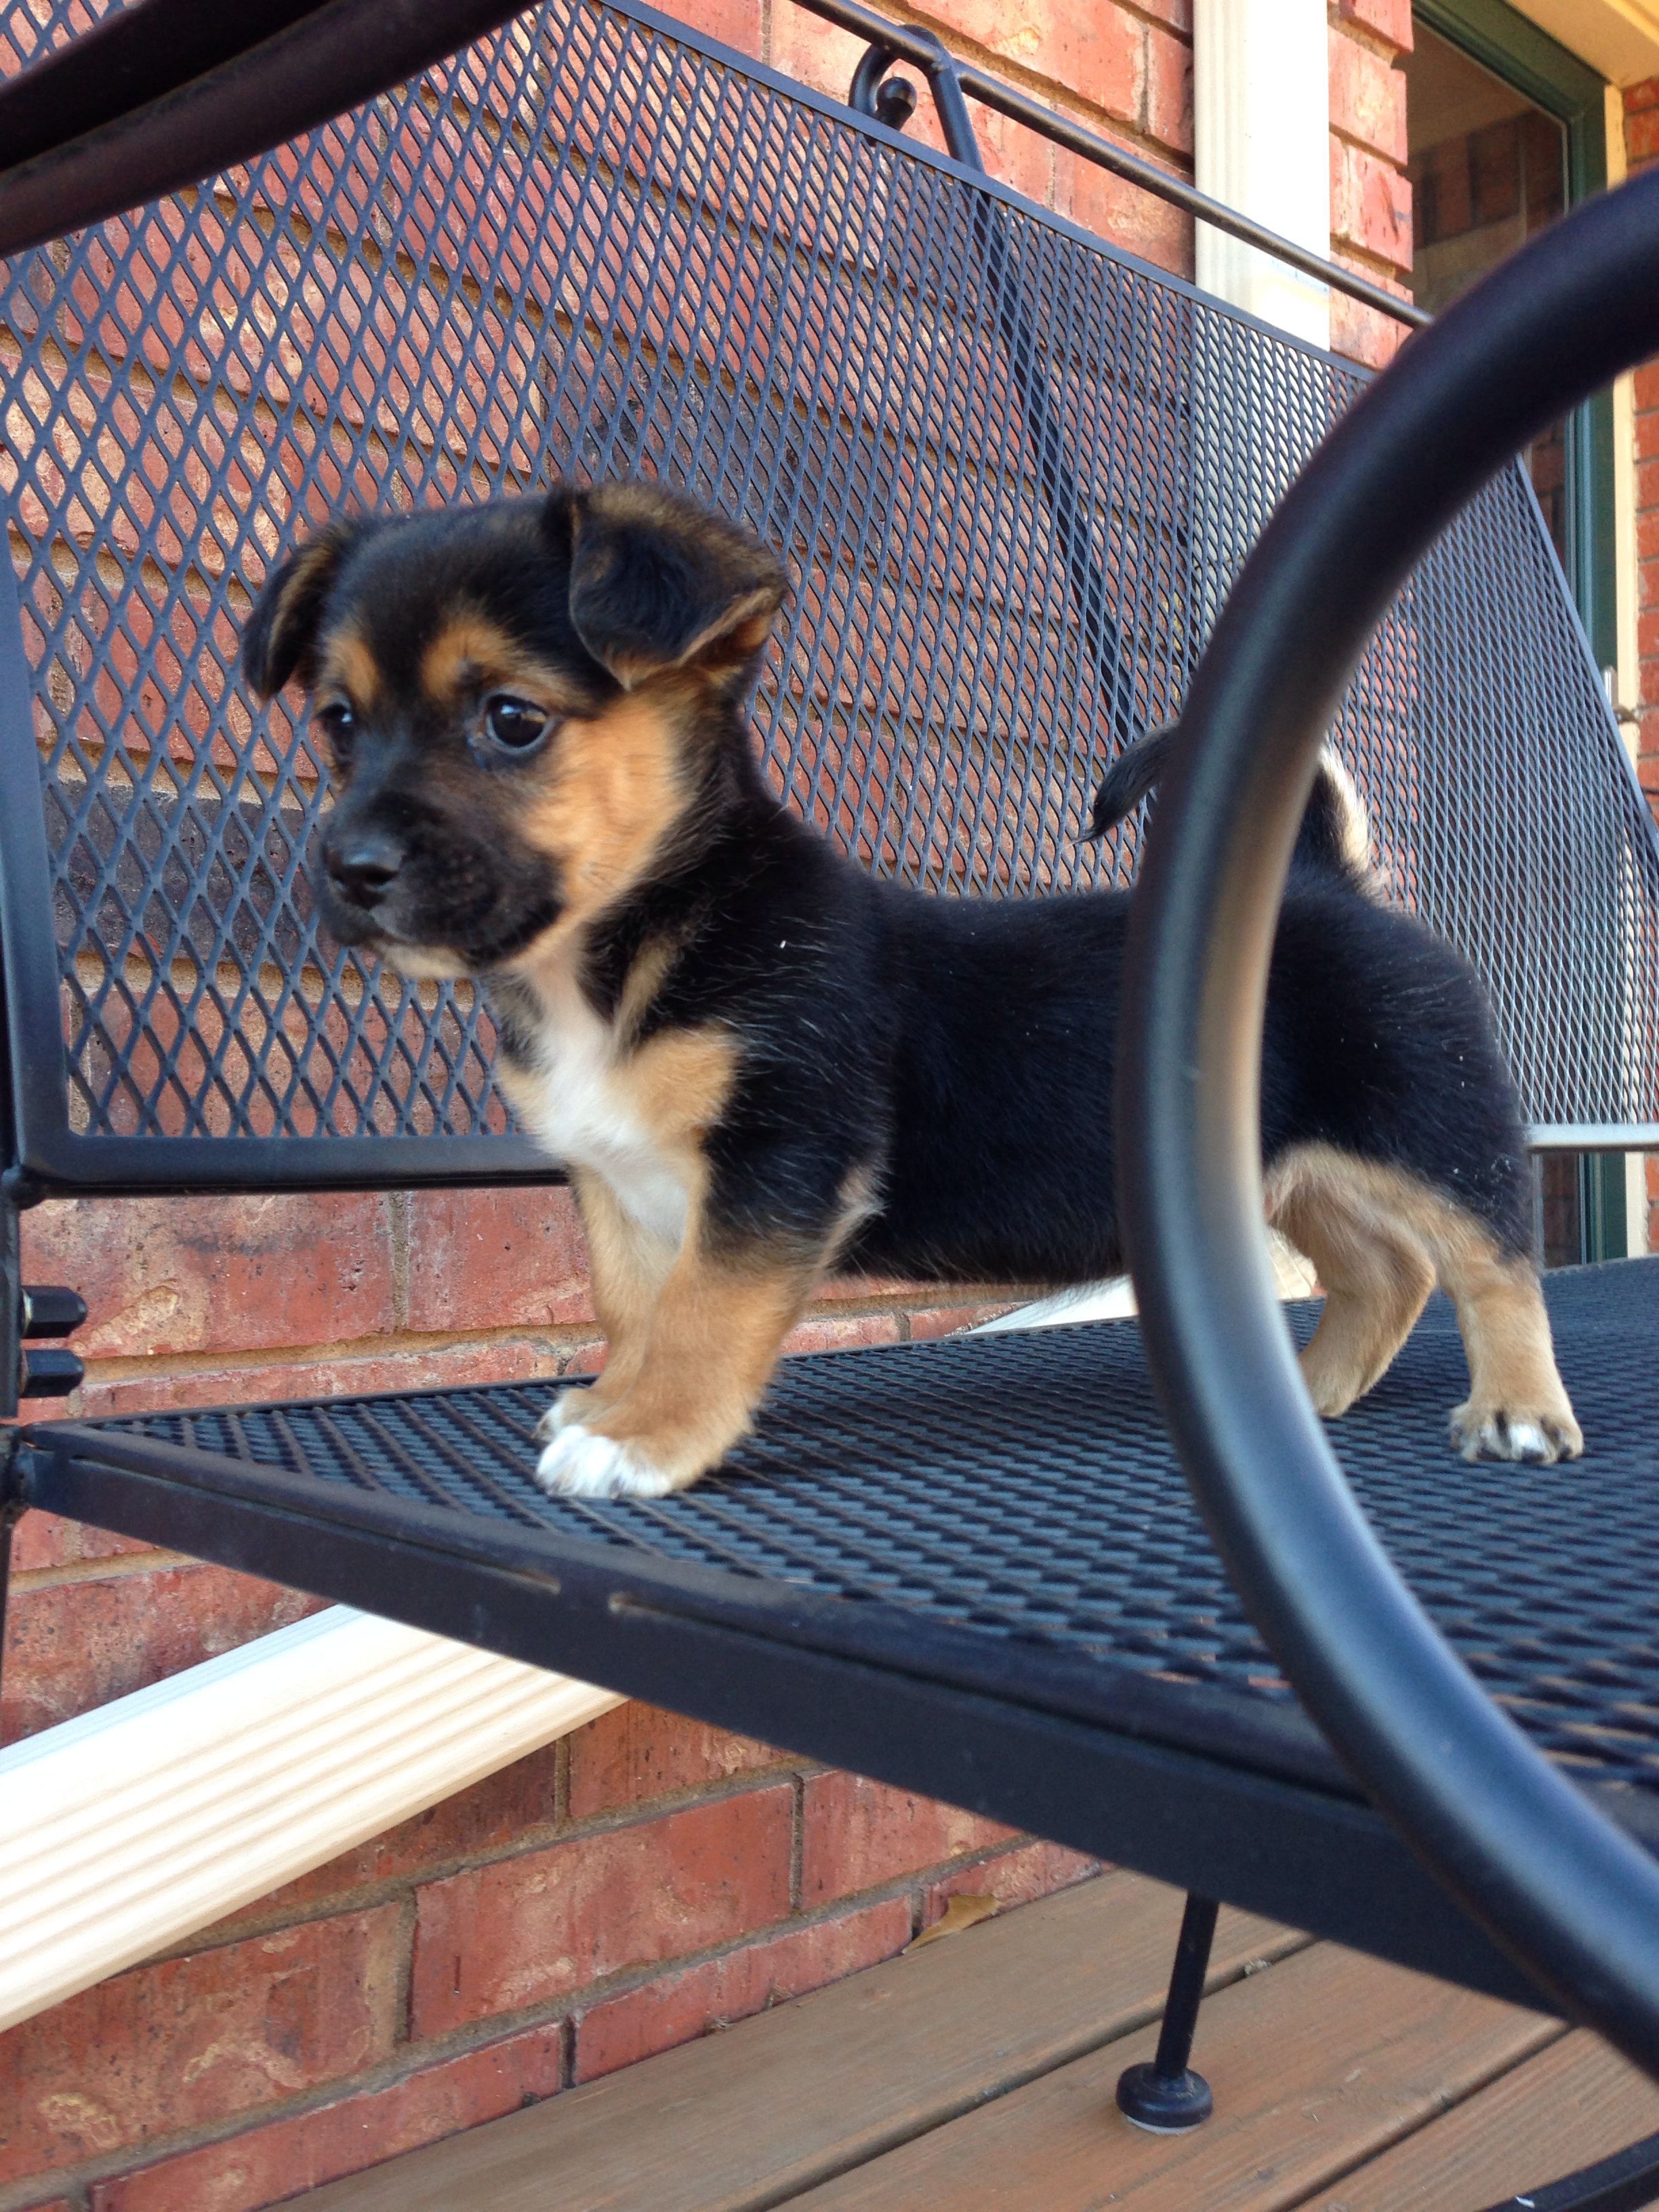 Chiweenie of Dachshund Chihuahua mix on the stainless steel bench outdoors